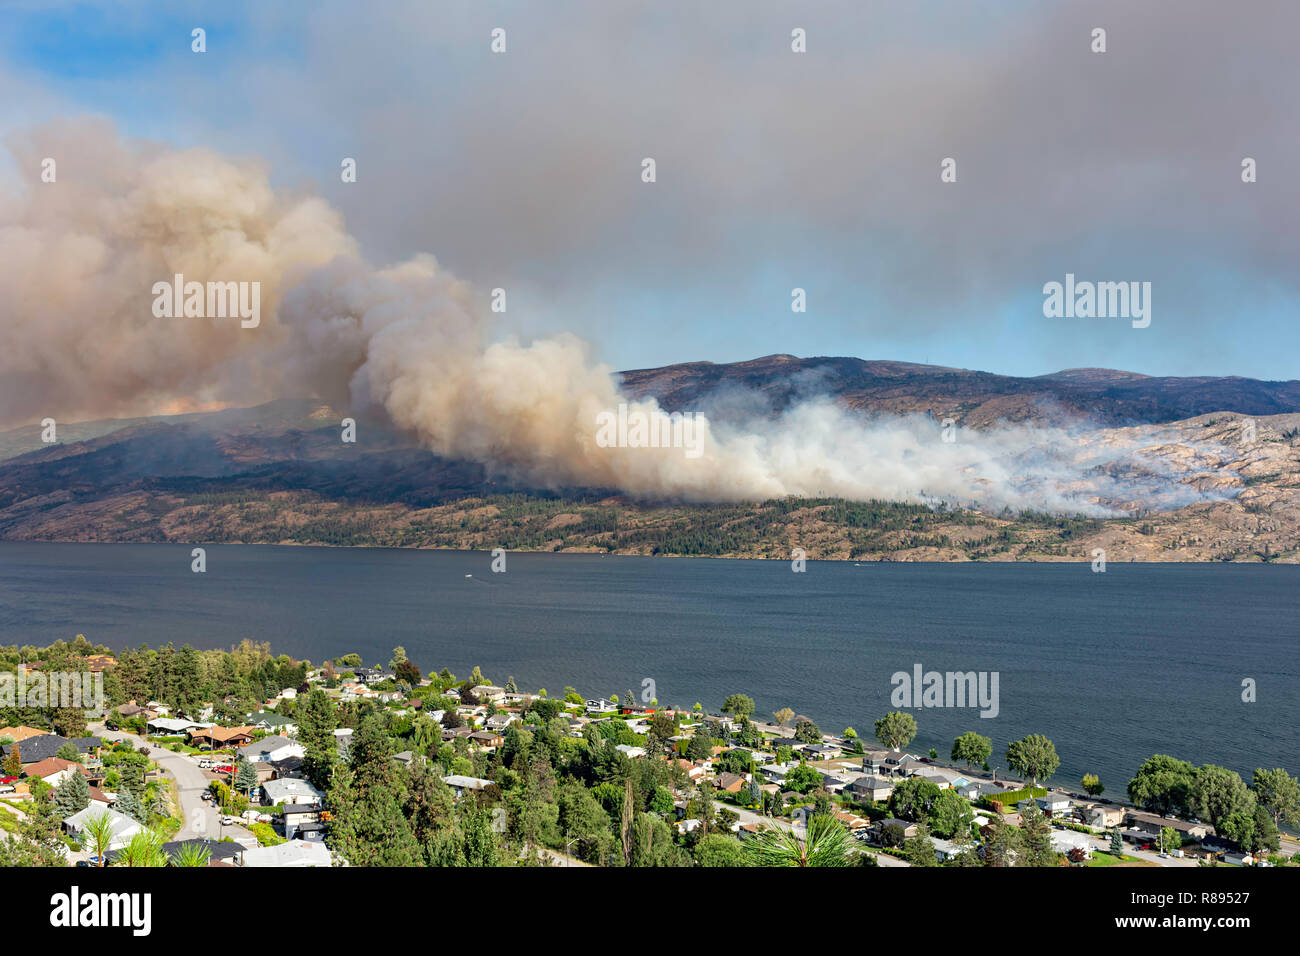 Smoke from a forest fire near Pearchland British Columbia Canada Stock Photo